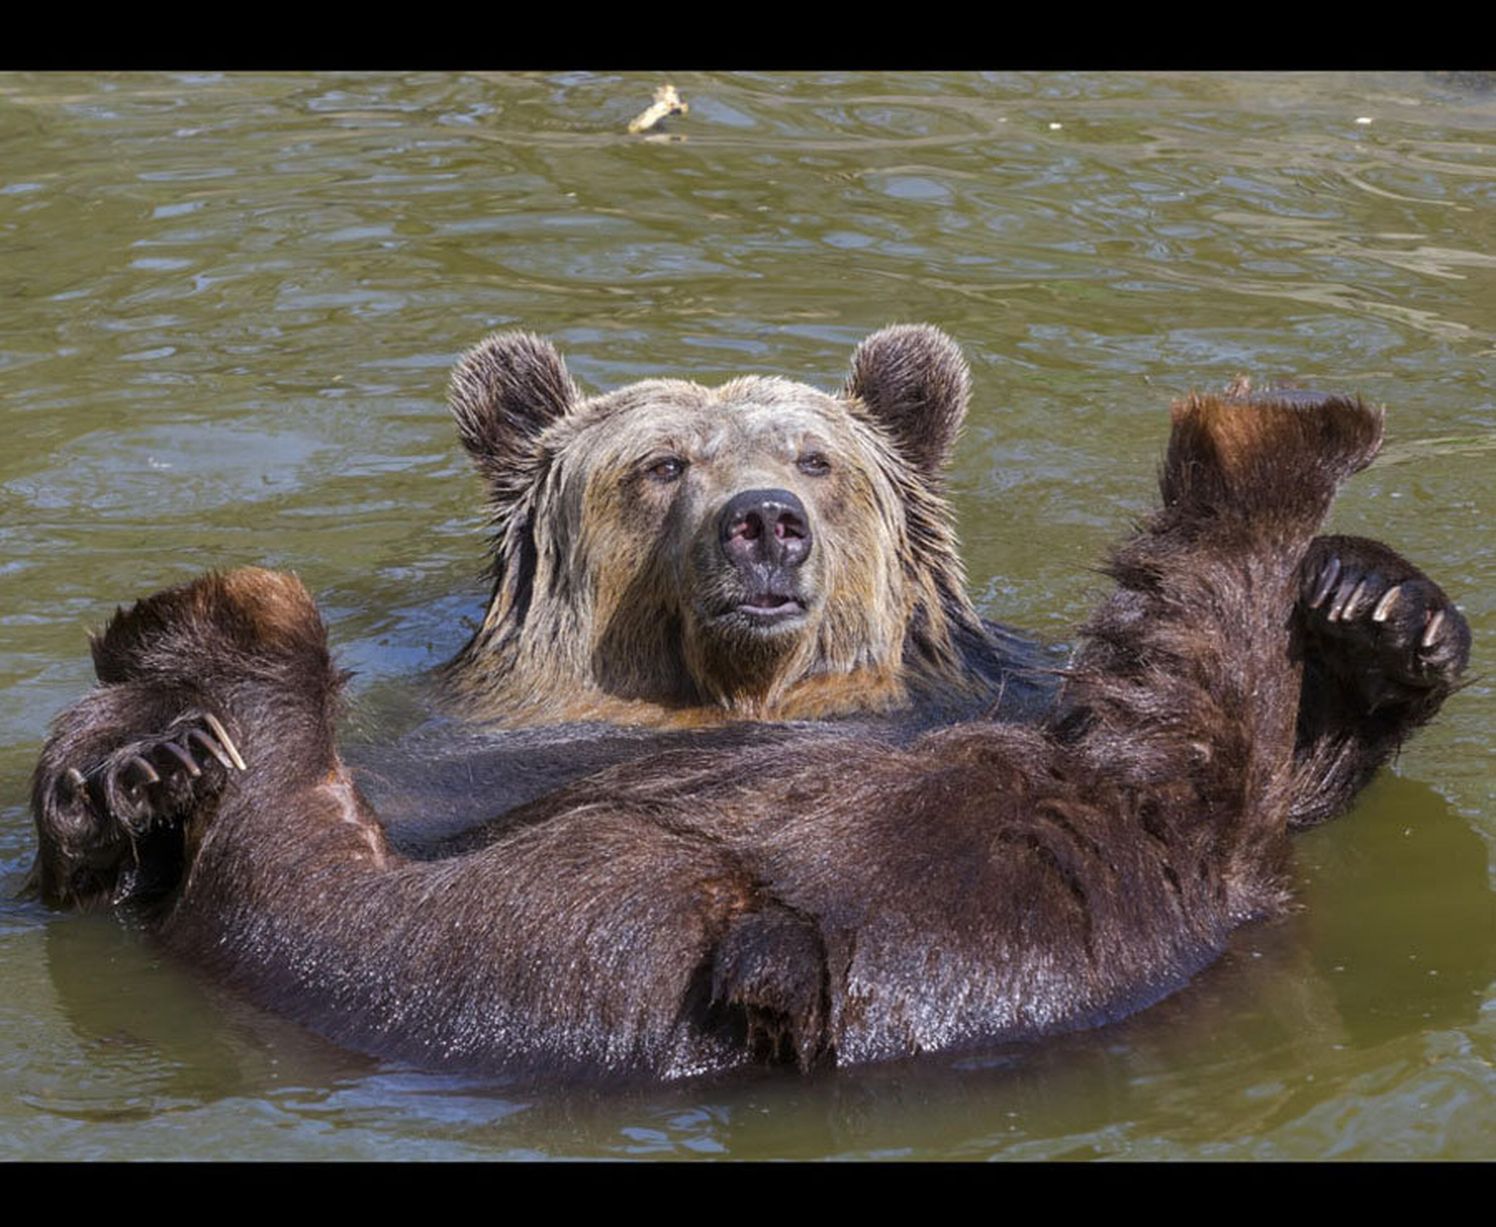 Ursula the brown bear soaks up the summer sunshine while floating in a pool at Szeged Zoo, Hungary